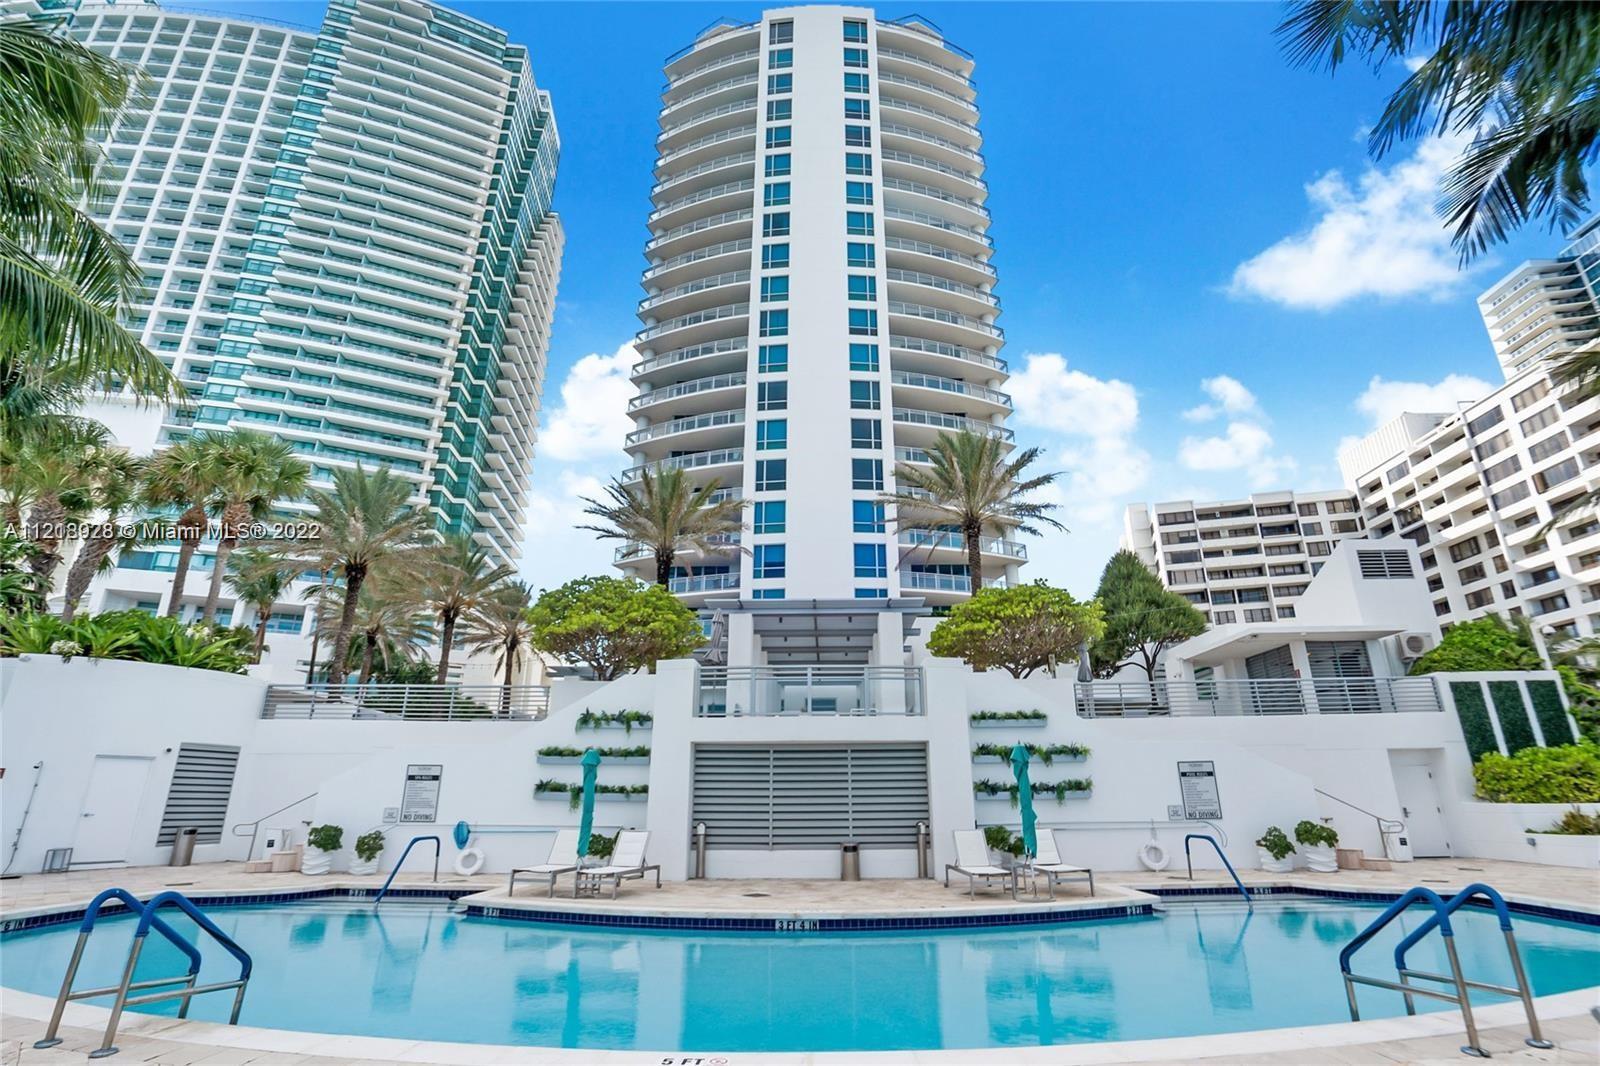 MAGNIFICENT VIEWS OF THE OCEAN, BEACH, SUNSET IN THIS SPACIOUS 3 BEDROOM / 3.5 BATH CORNER UNIT! LIG